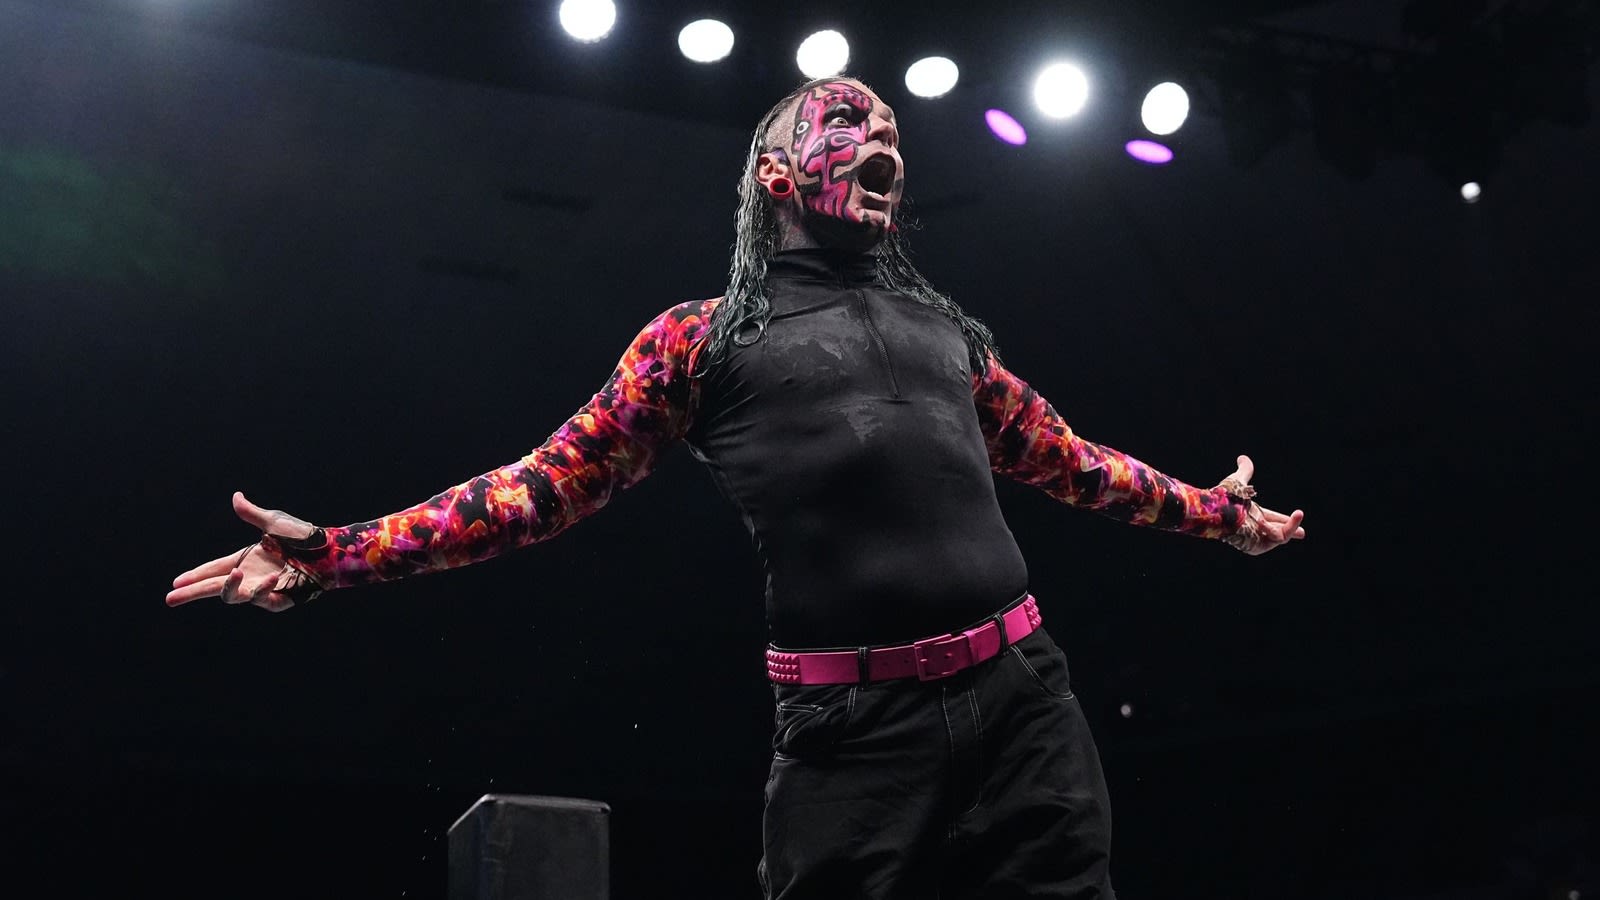 Jim Ross Says This AEW Star Has 'A Lot' Of Jeff Hardy In Him - Wrestling Inc.